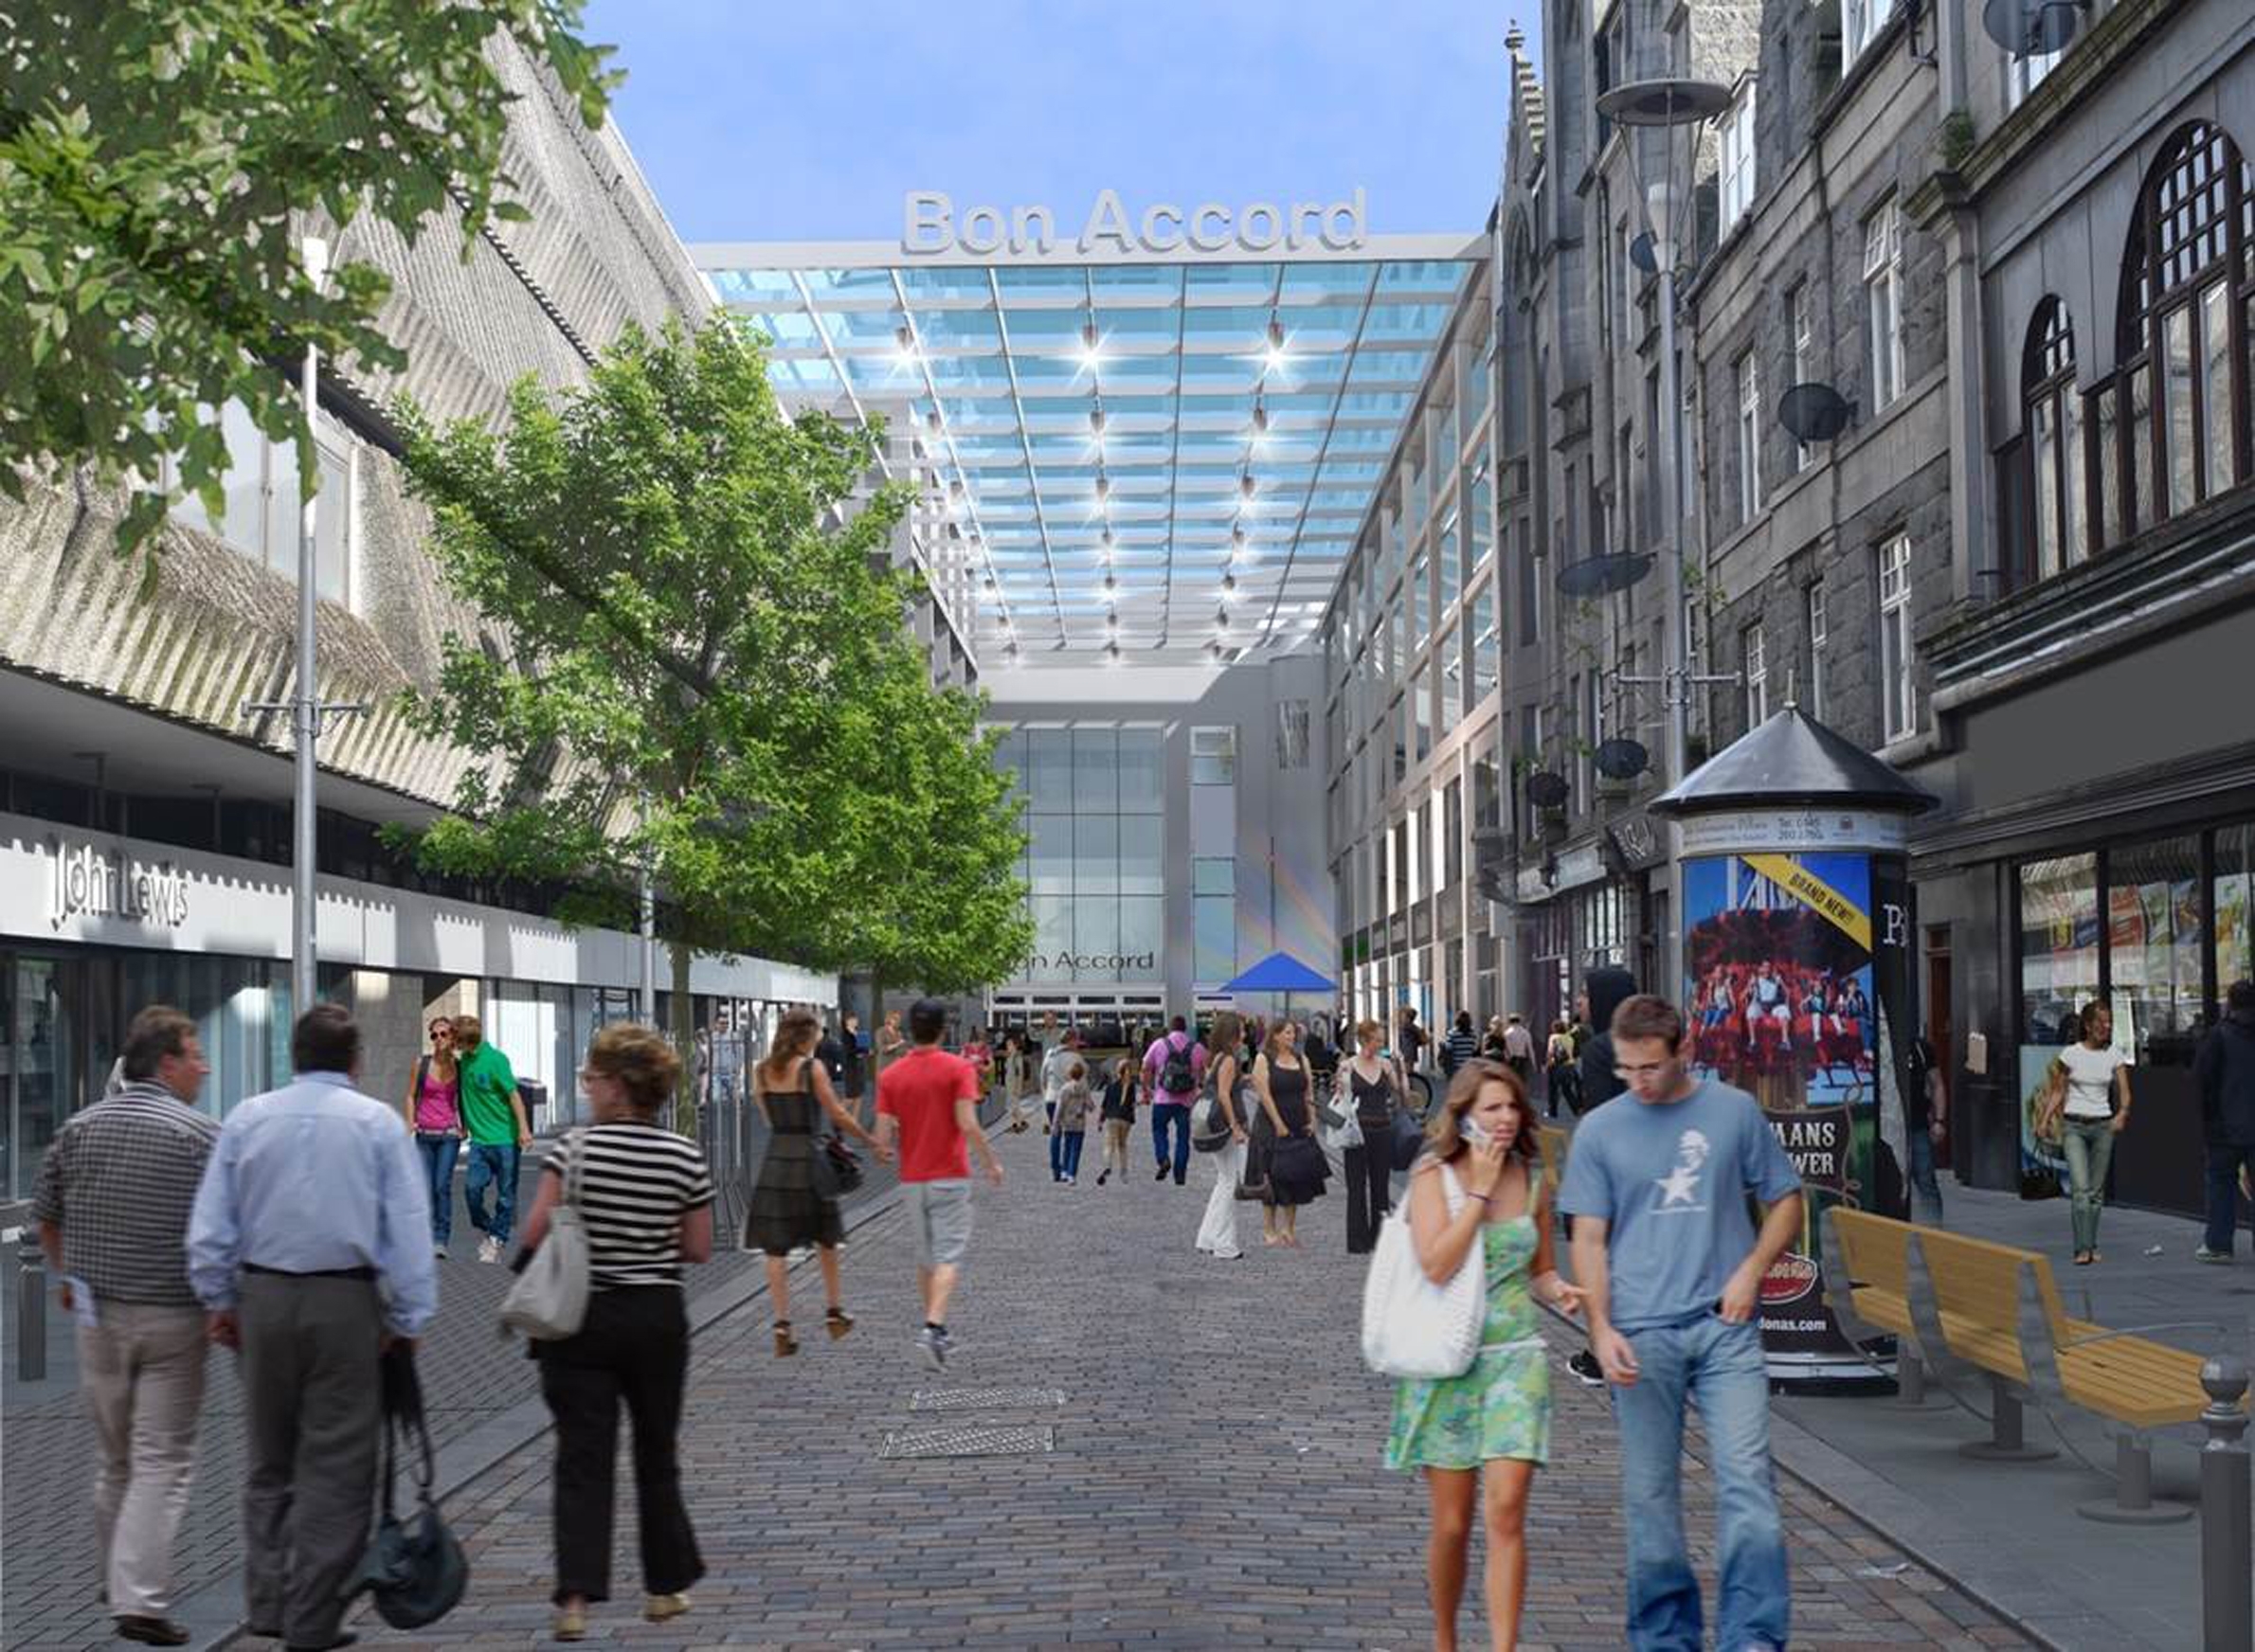 This is the first image of possible changes to the Bon Accord Centre.